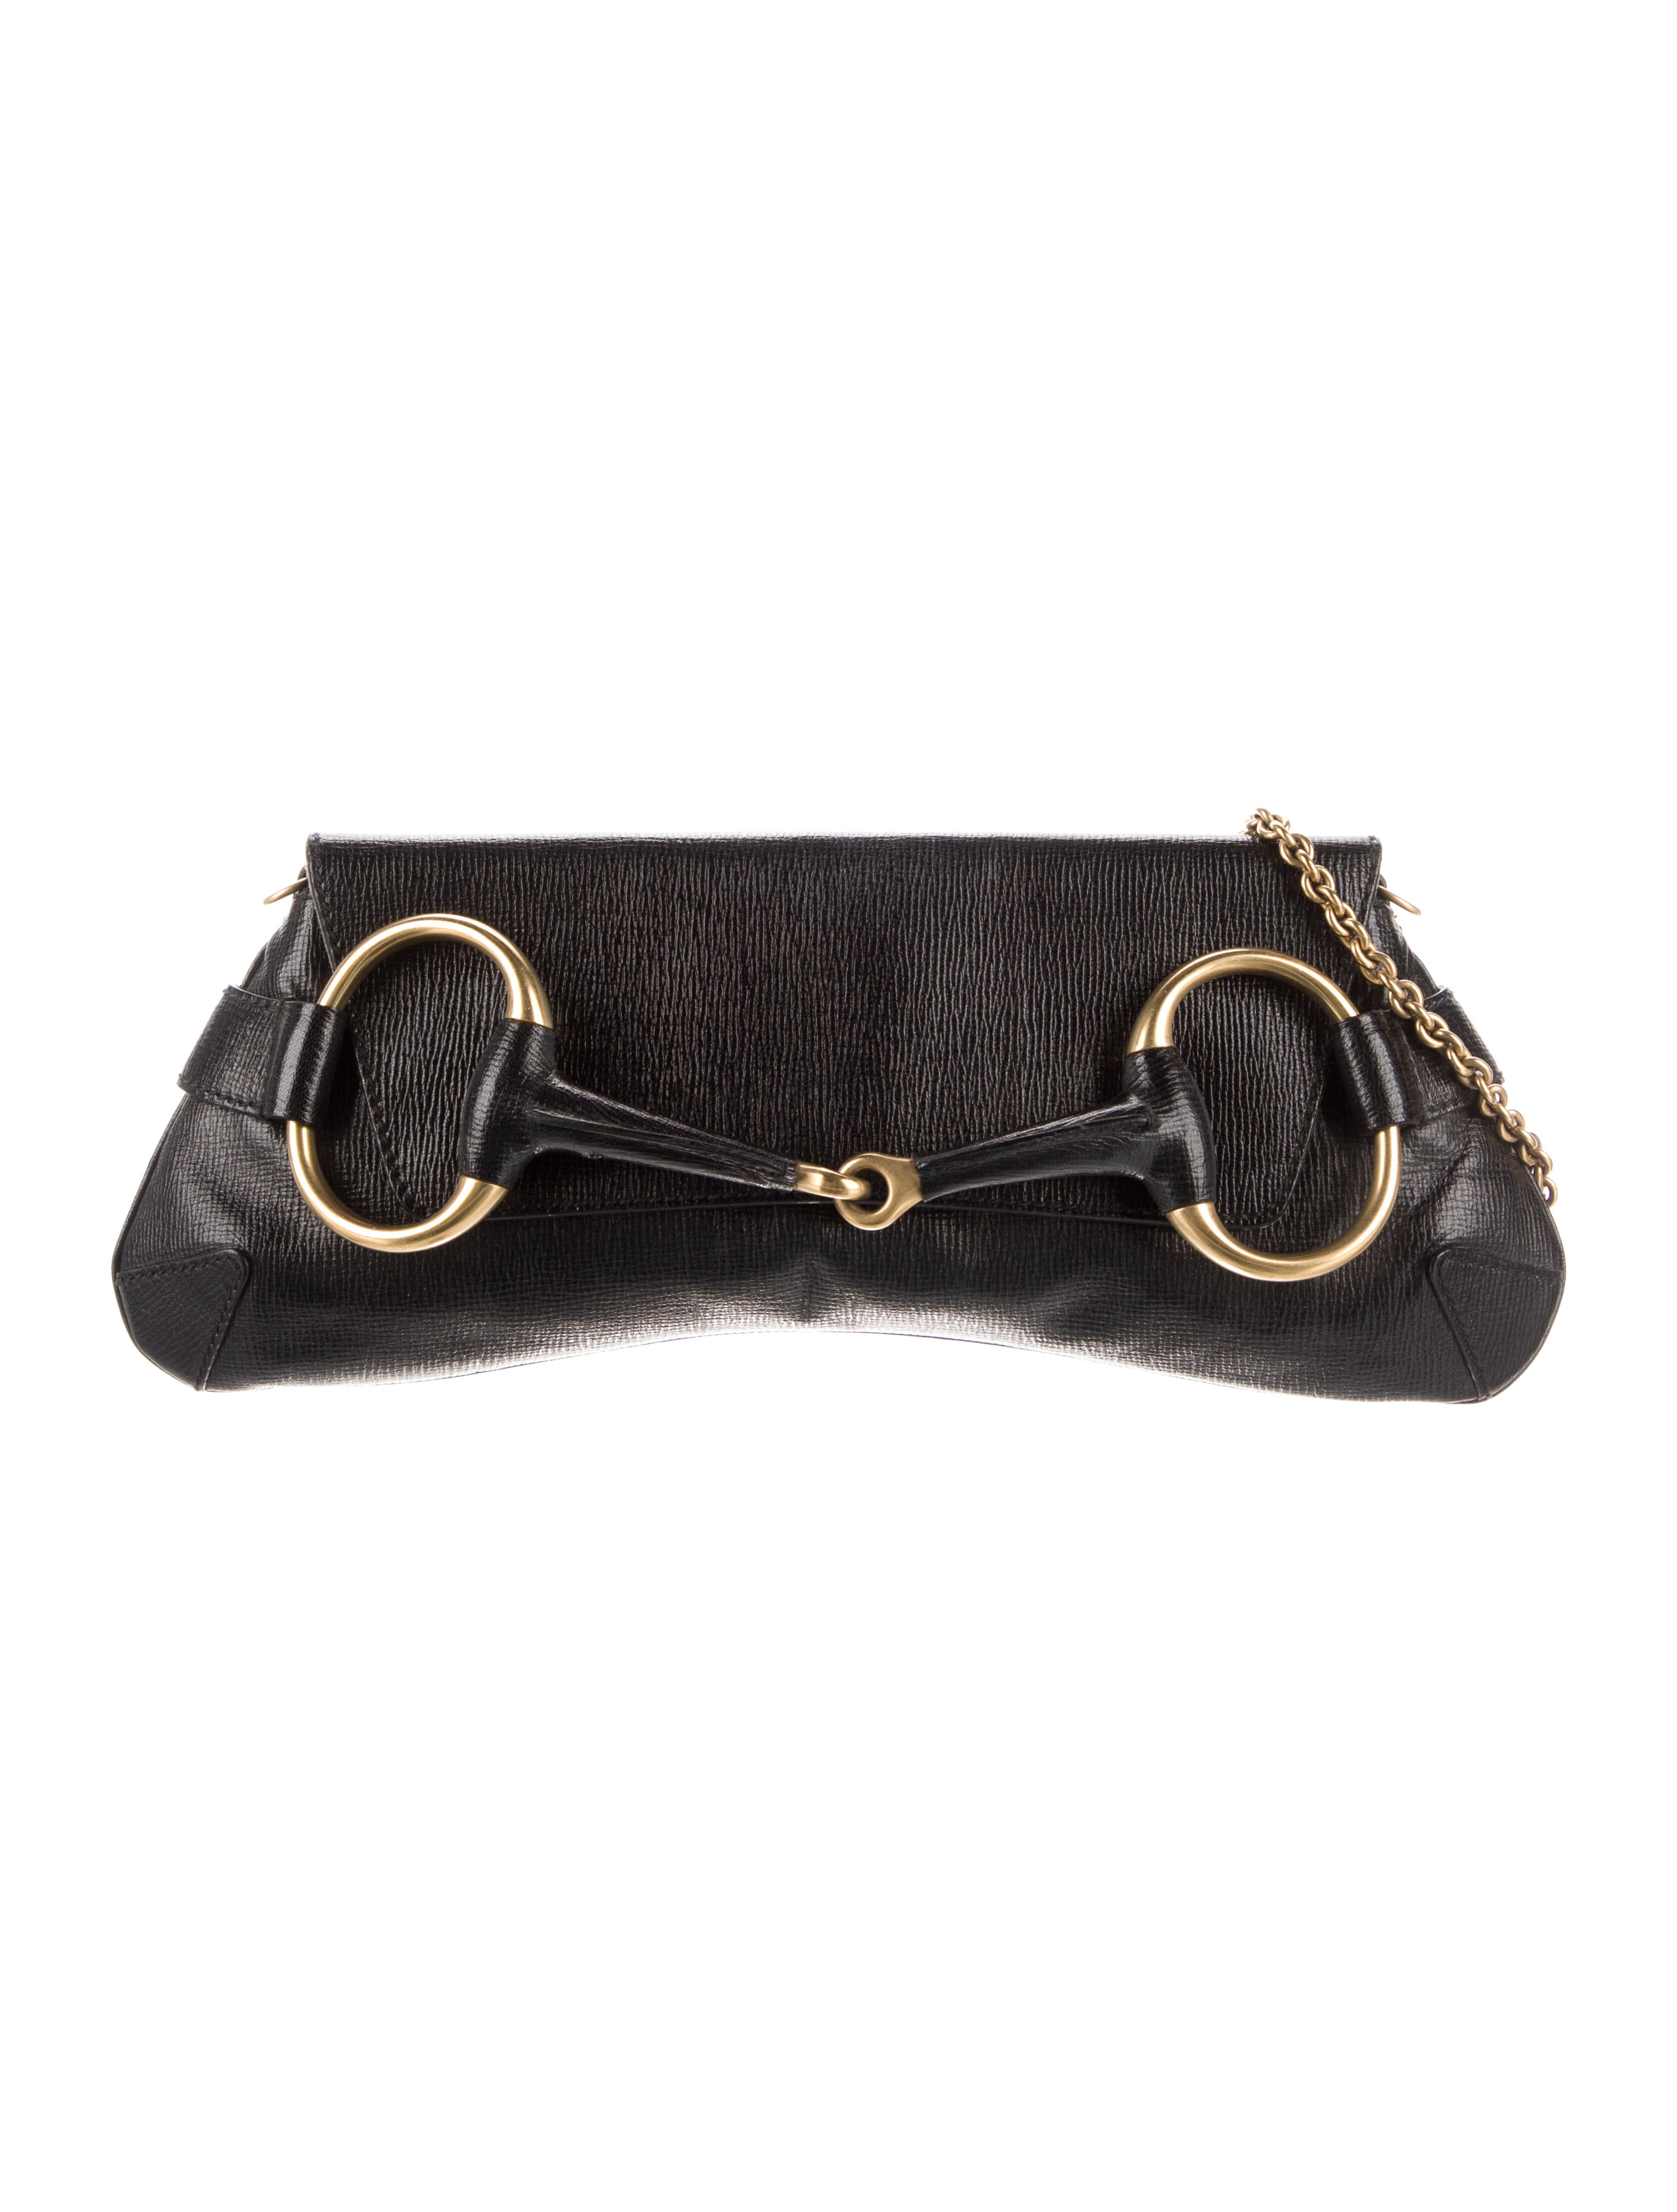 FWRD Renew Gucci Collection By Tom Ford Horsebit Clutch in Black